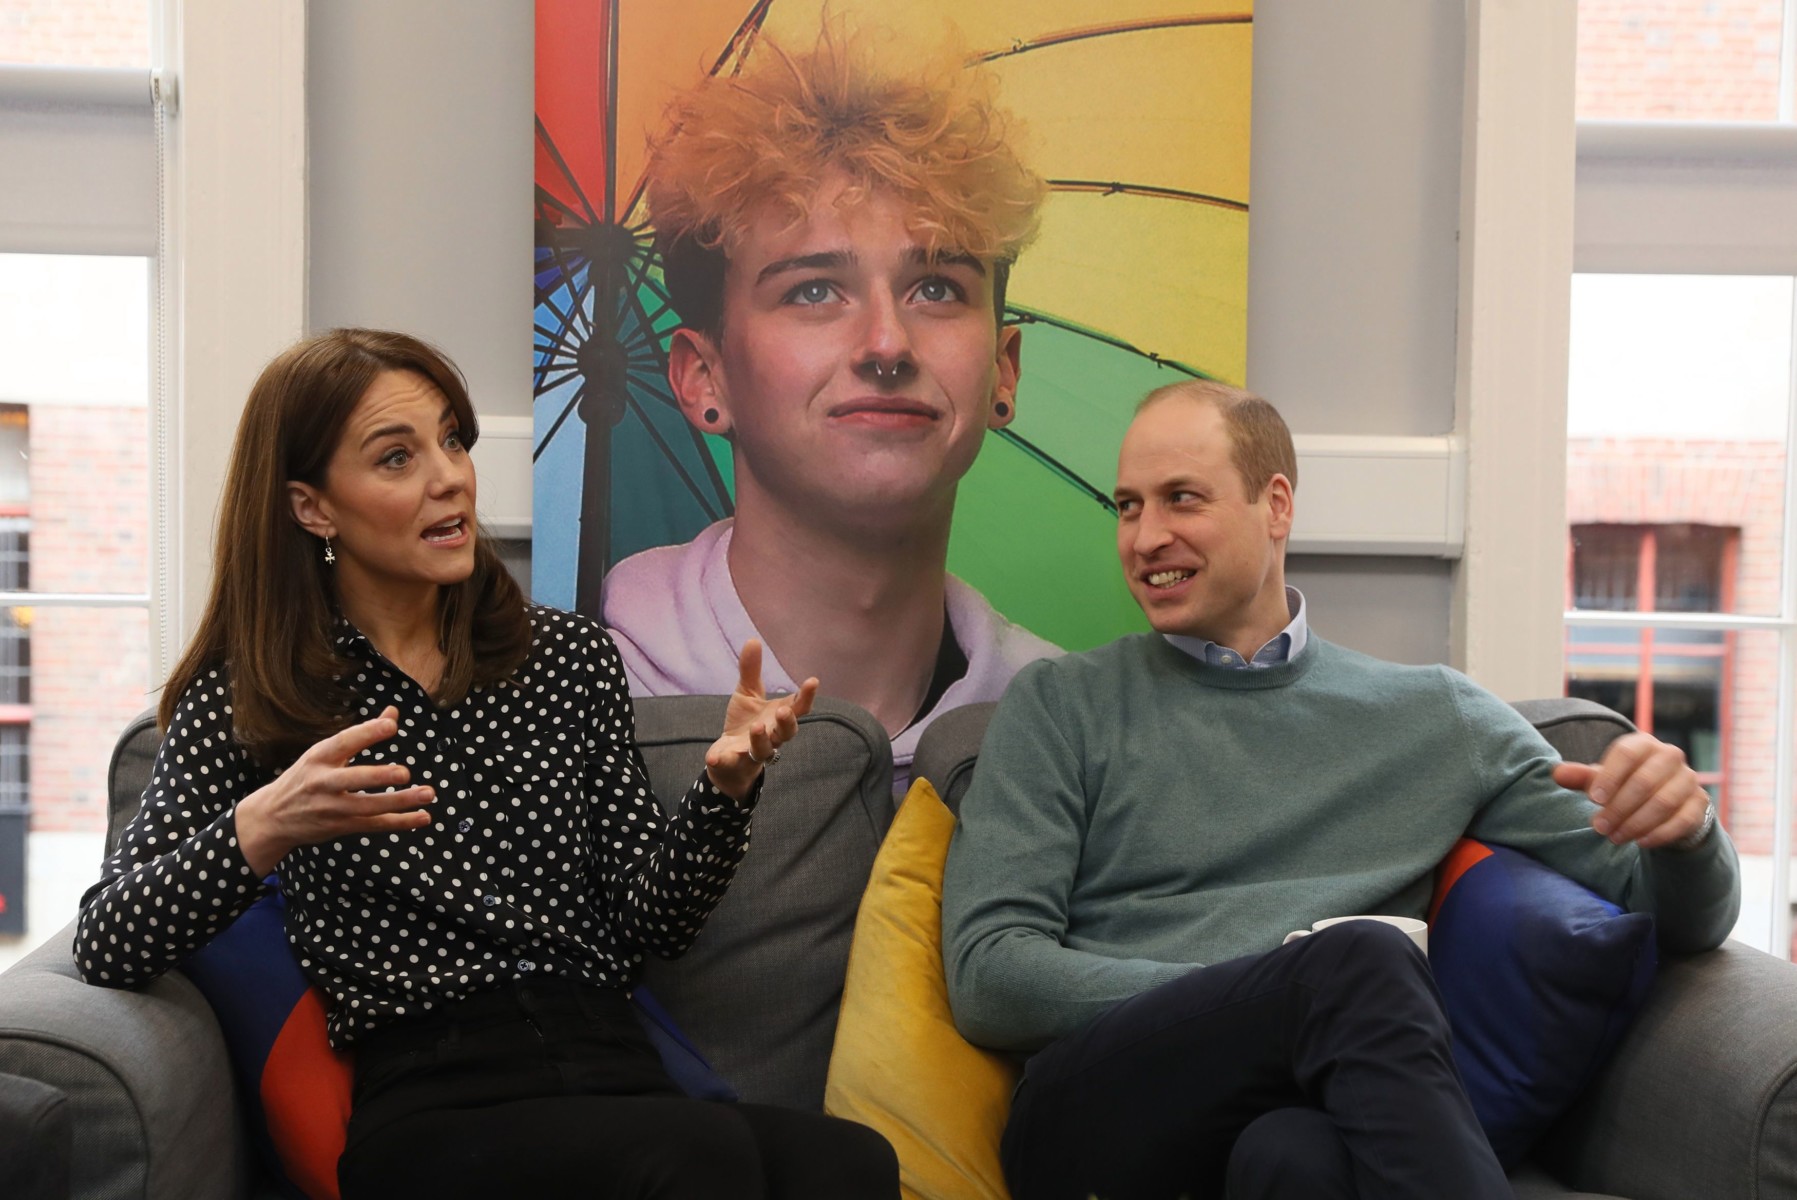 The Duke and Duchess of Cambridge during a visit to mental health charity Jigsaw in Dublin on March 4